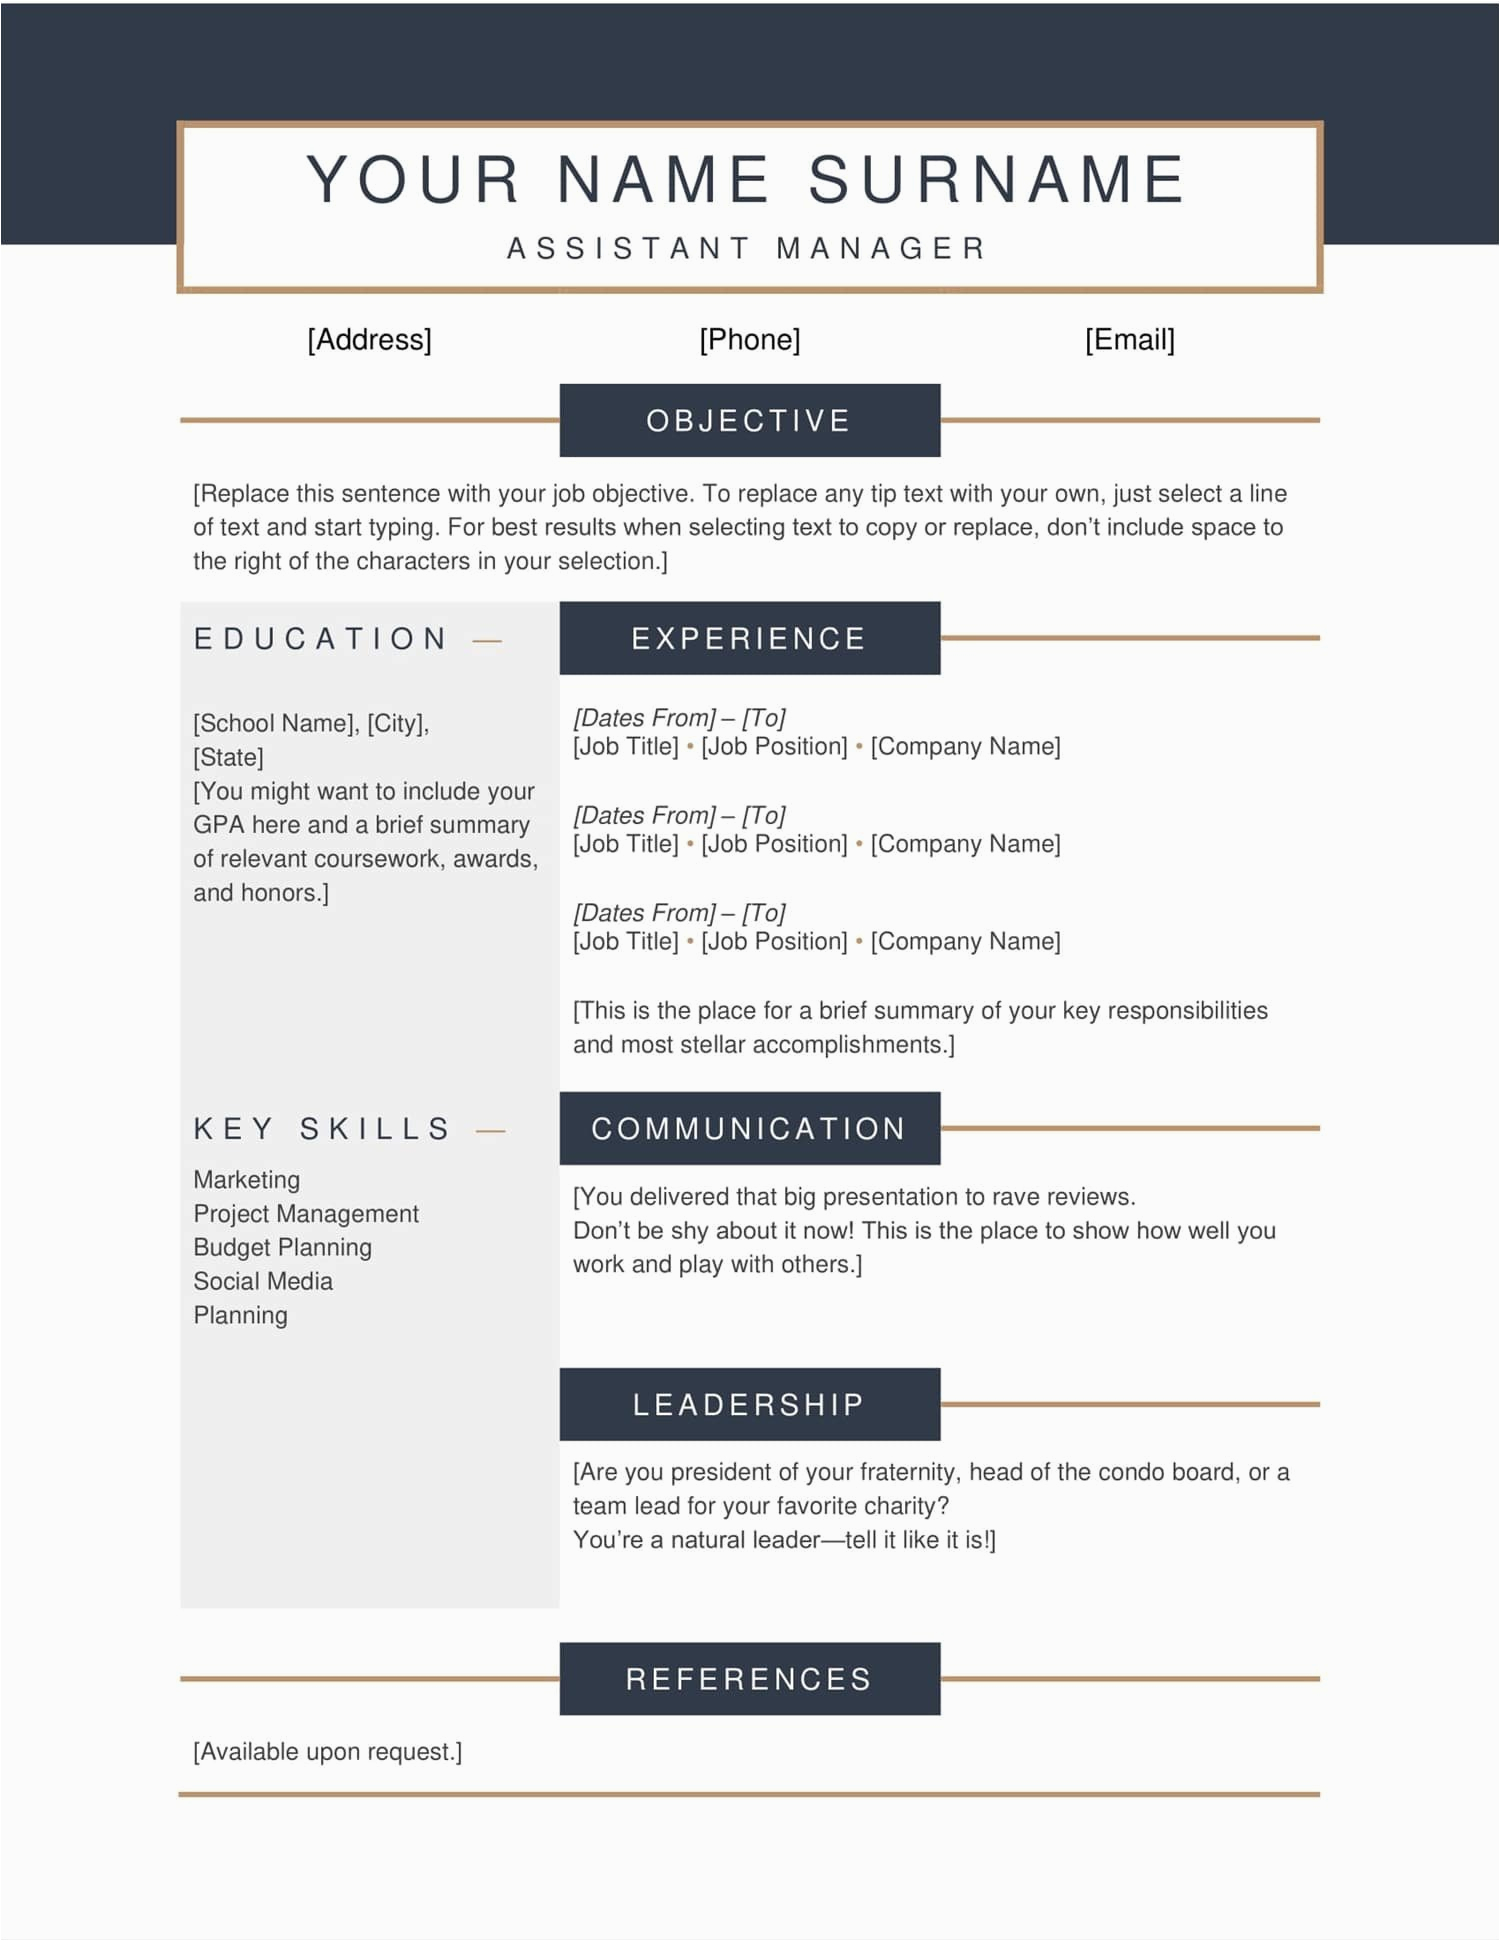 resume templates that i can copy and paste